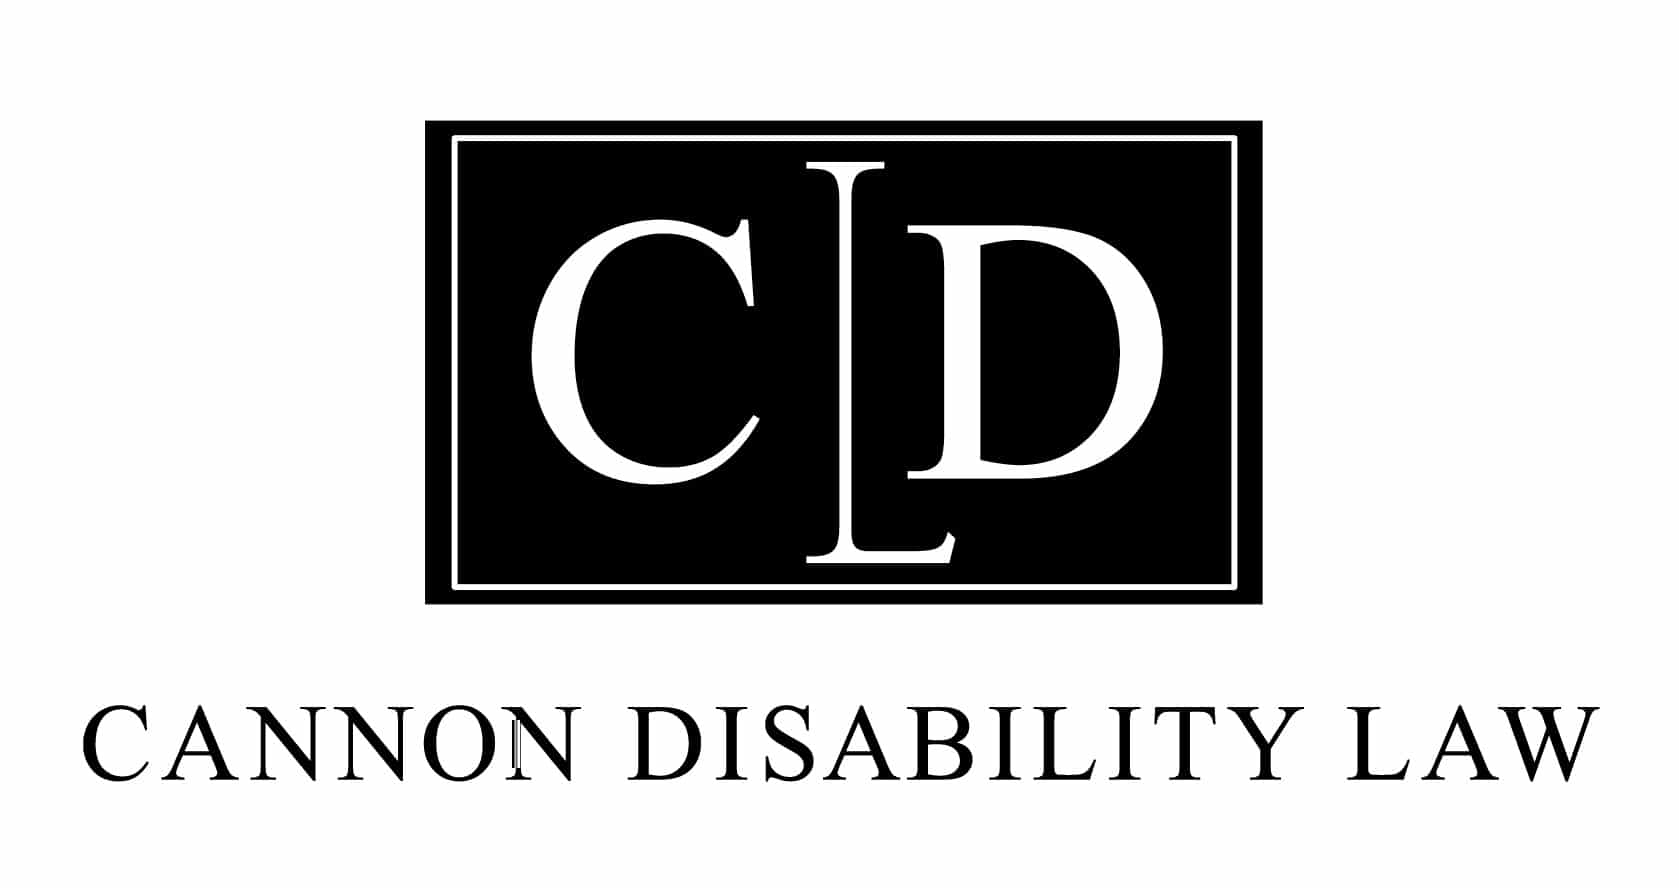 VARICOSE VEINS & SSD BENEFITS - Cannon Disability Law